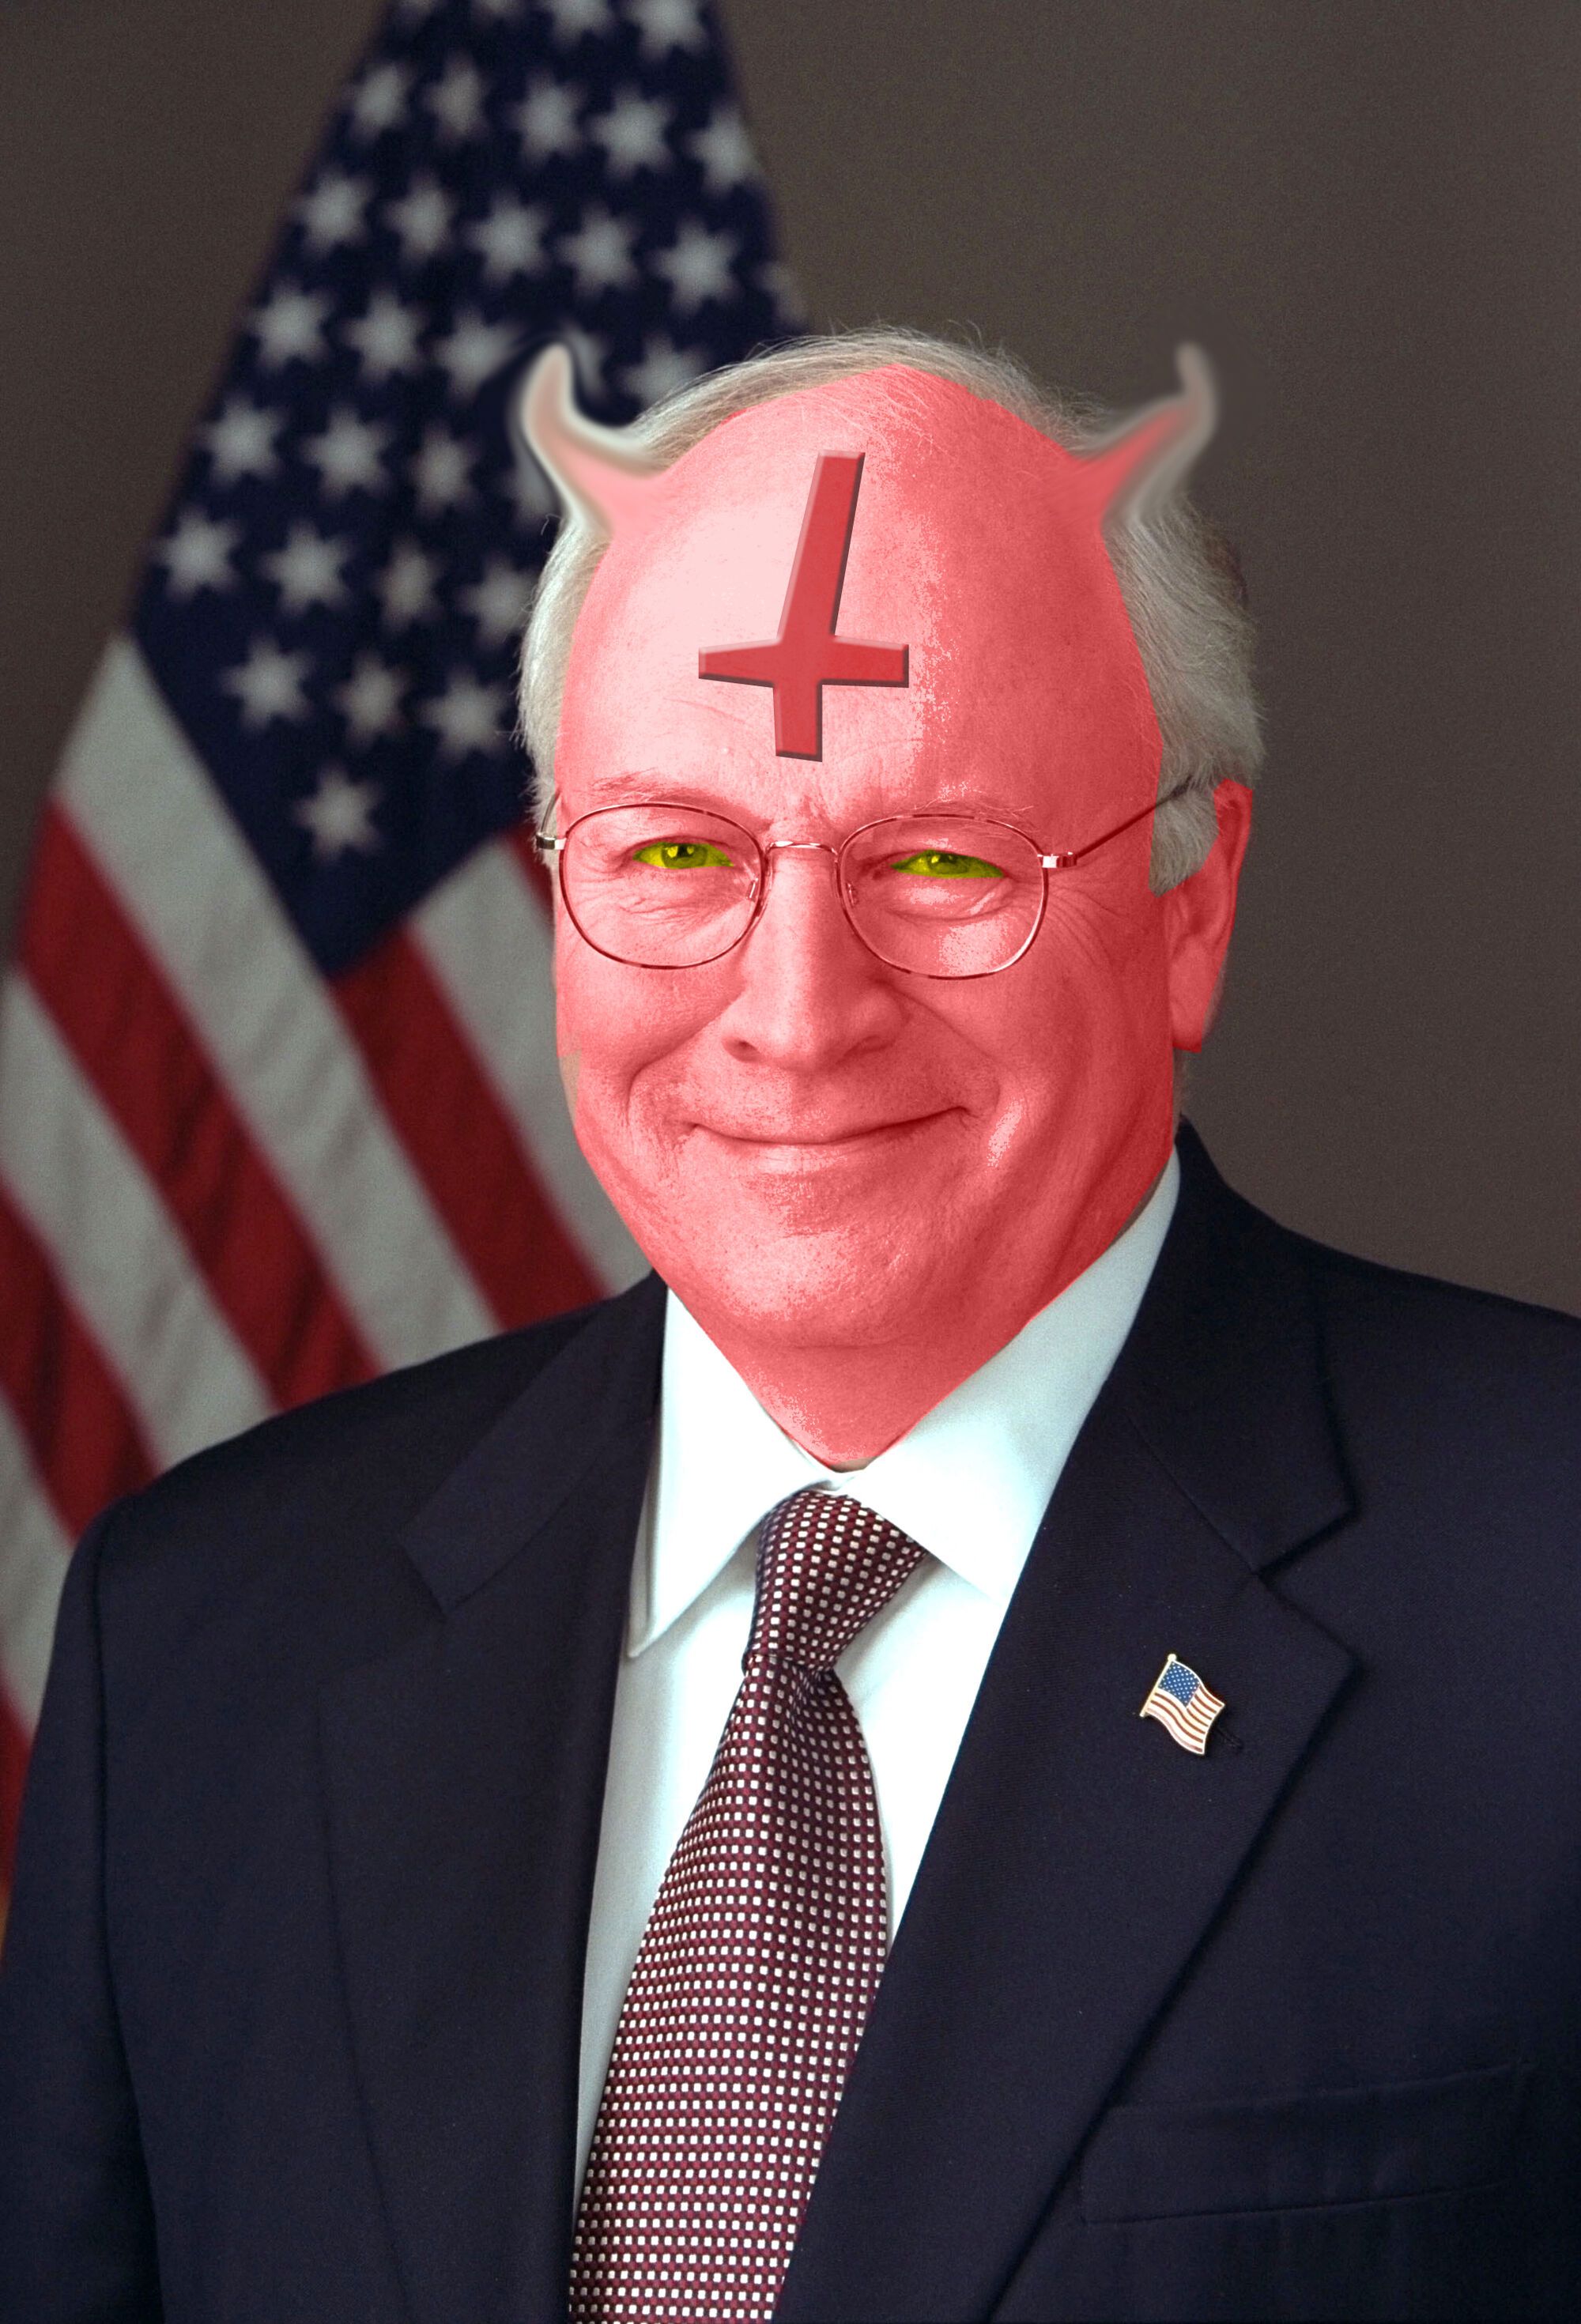 Bullet reccomend Dick cheney is evil